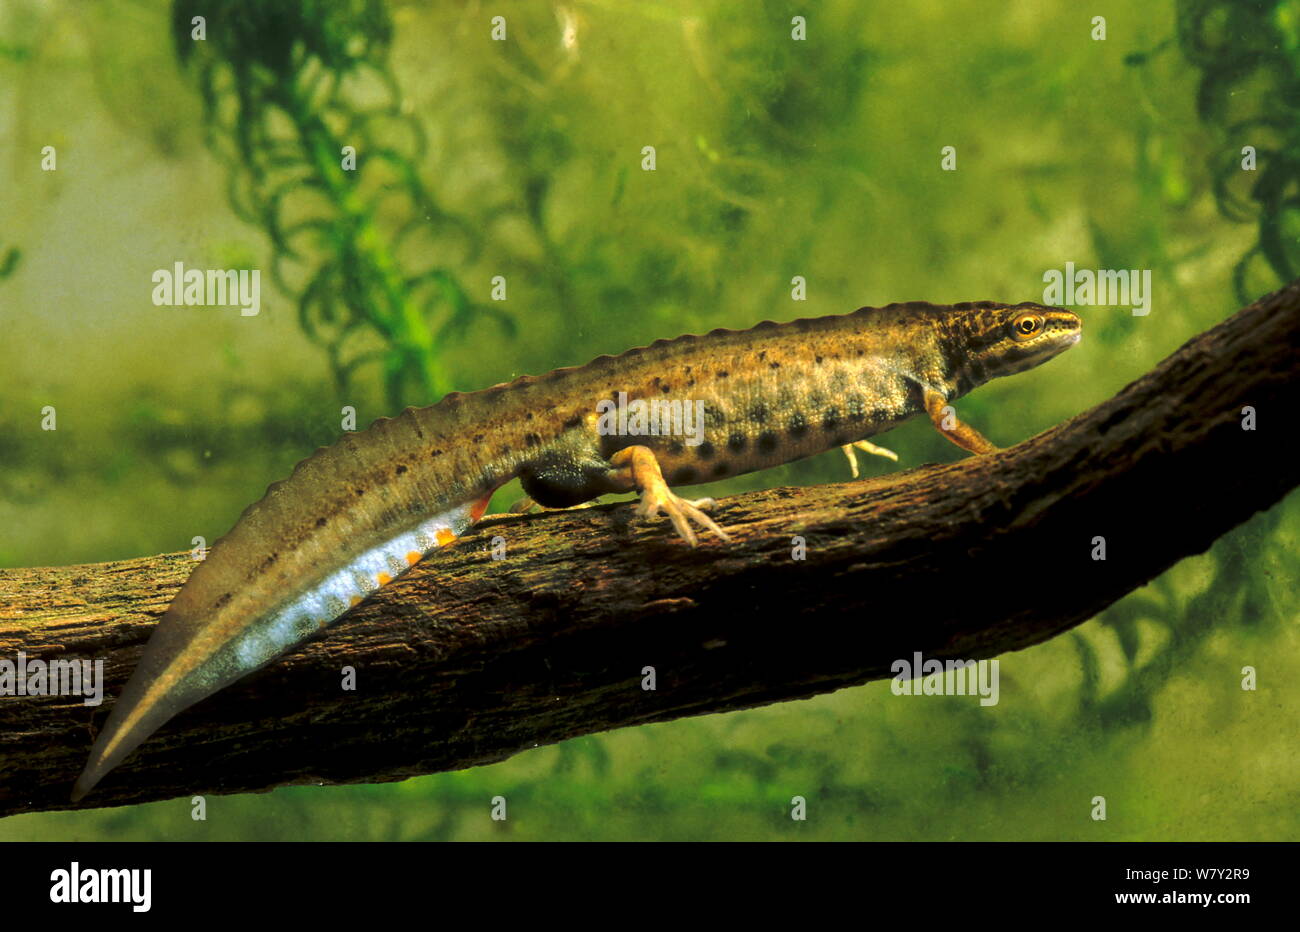 Common newt / Smooth newt (Triturus vulgaris) male in breeding colouration. South-west London, UK. Stock Photo